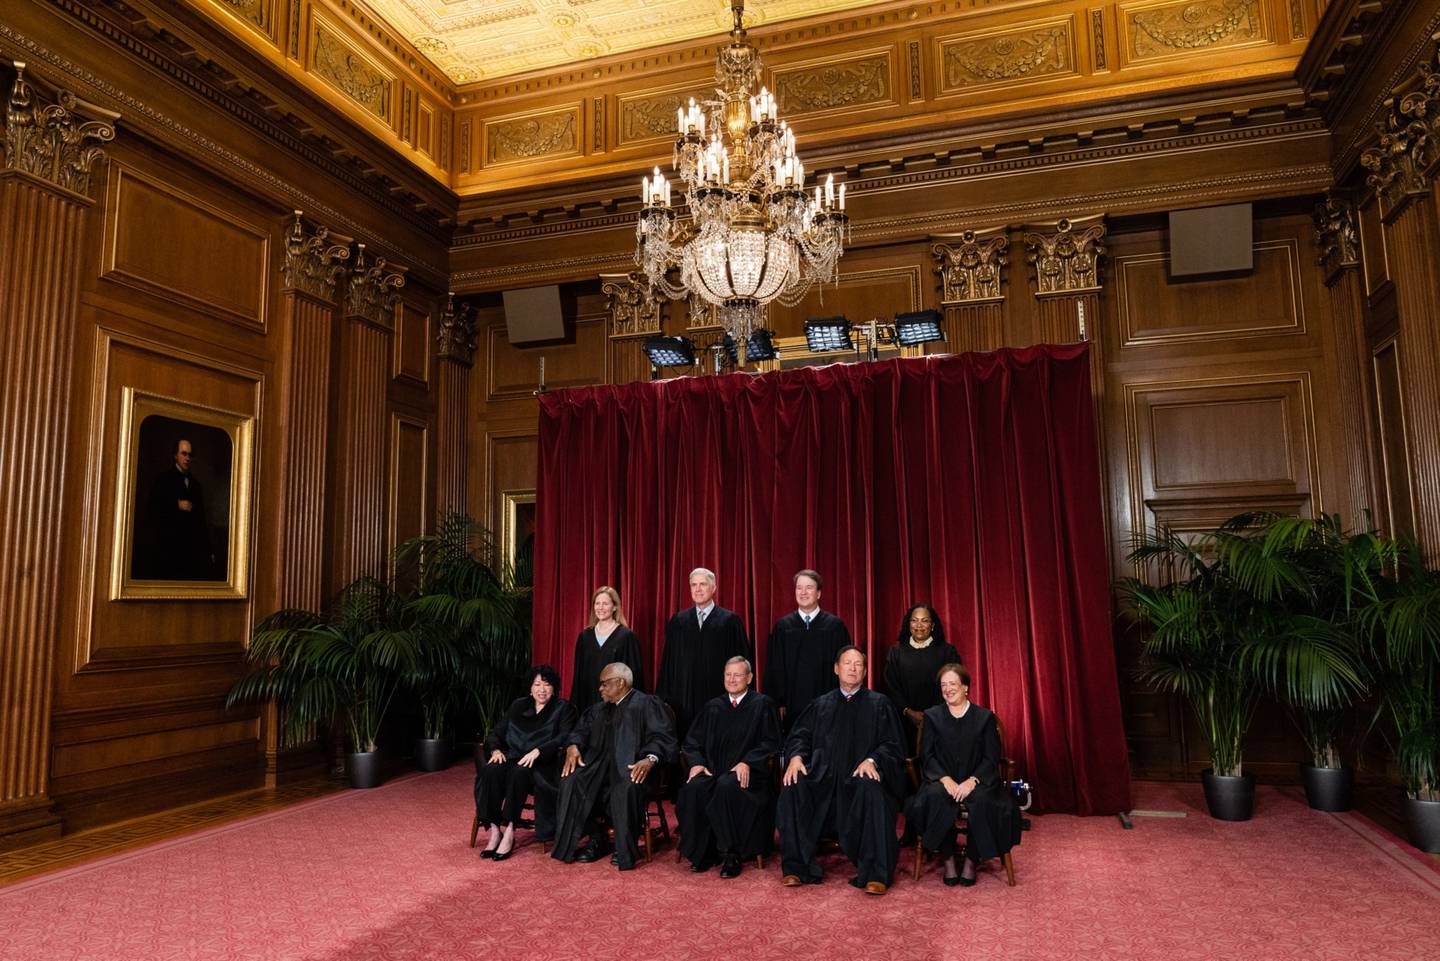 Justices of the US Supreme Court during a formal group photograph at the Supreme Court in Washington, DC, US, on Friday, Oct. 7, 2022. Seated from left: Associate Justice Sonia Sotomayor, Associate Justice Clarence Thomas, Chief Justice John Roberts, Associate Justice Samuel Alito Jr. and Associate Justice Elena Kagan. Standing from left: Associate Justice Amy Coney Barrett, Associate Justice Neil Gorsuch, Associate Justice Brett Kavanaugh and Associate Justice Ketanji Brown Jackson. The court opened its new term Monday with a calendar already full of high-profile clashes, including two cases that could end the use of race in college admissions.